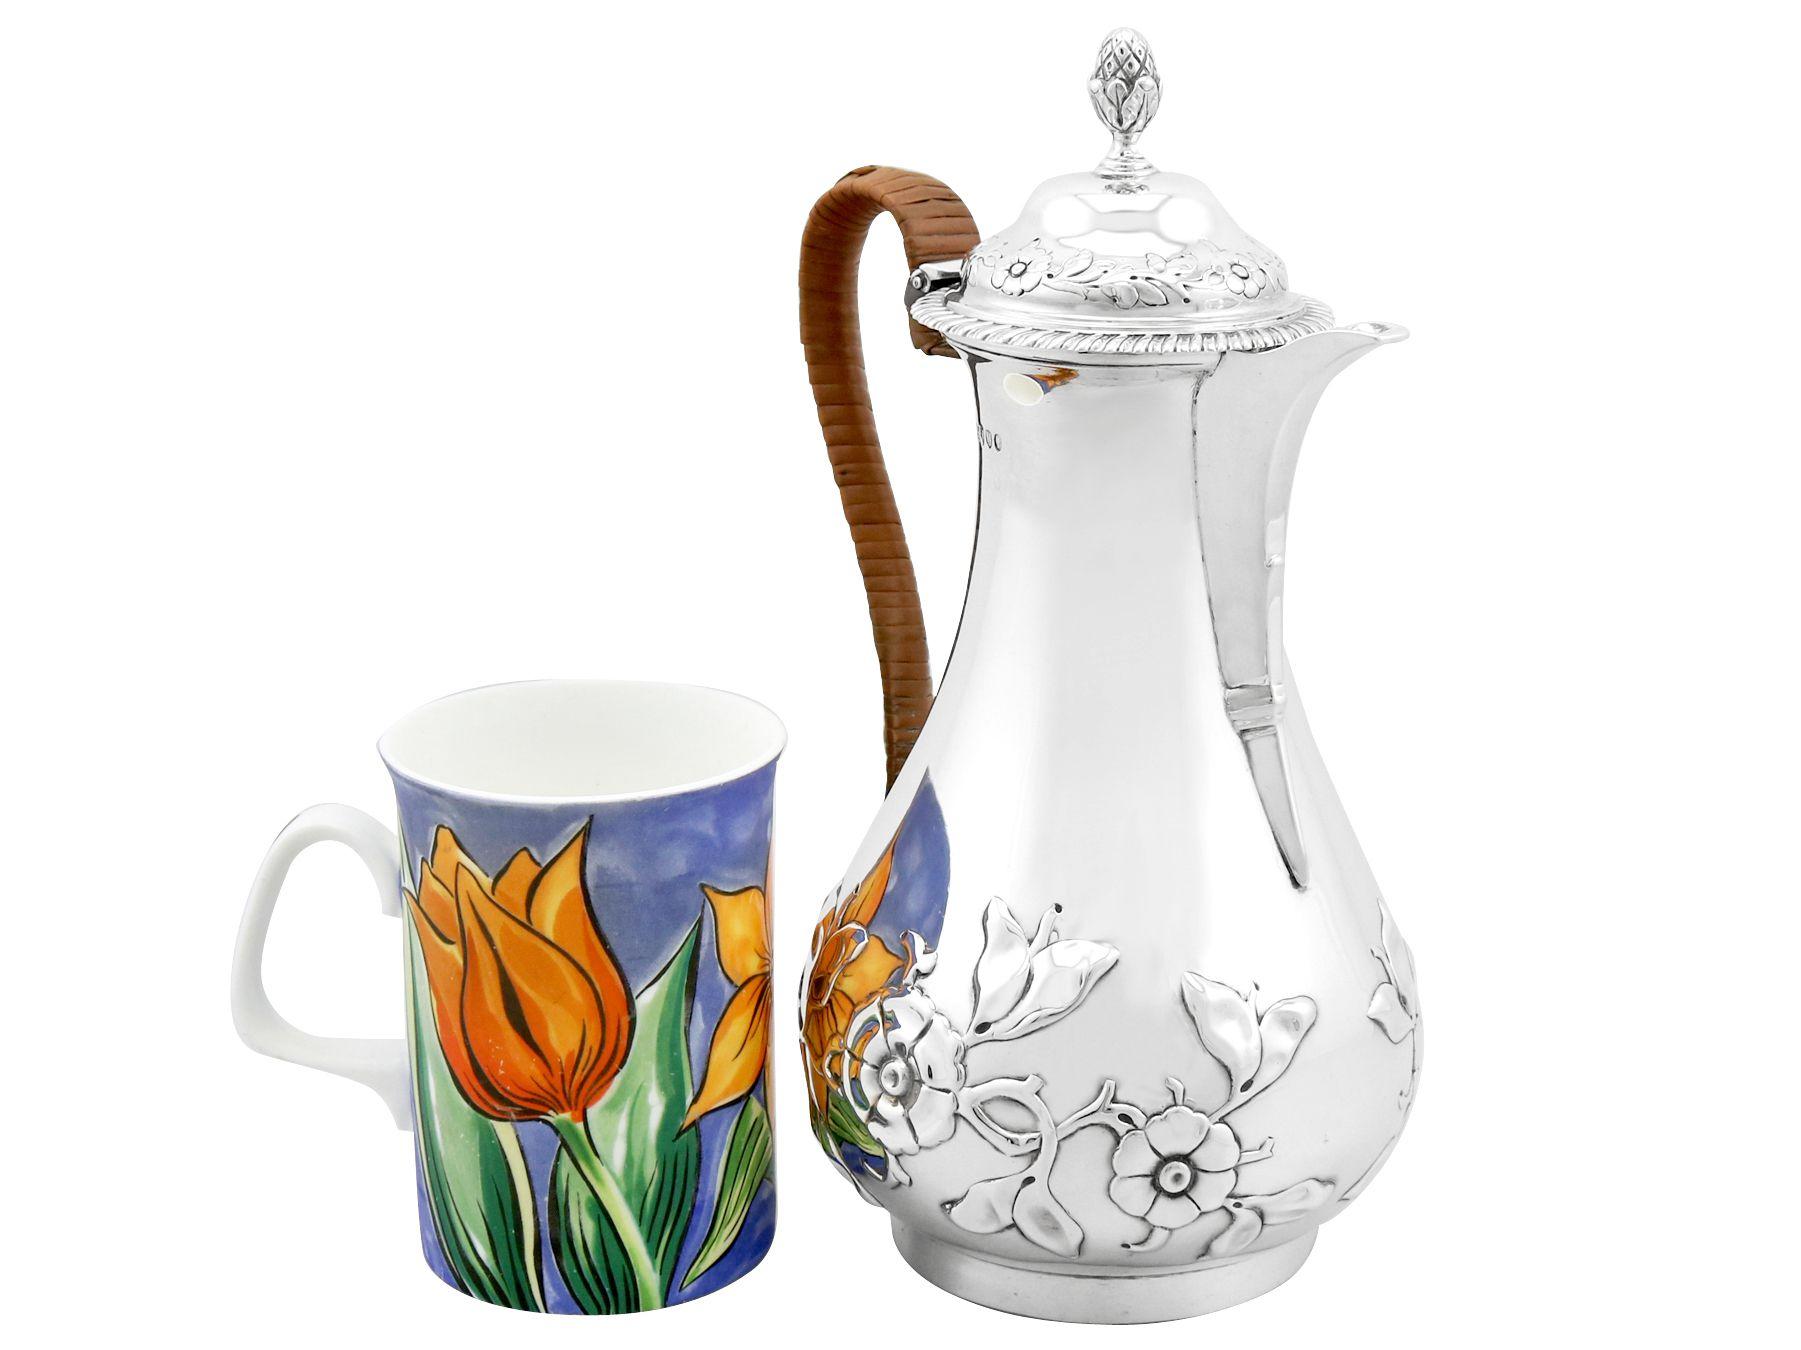 A fine and impressive antique Victorian English sterling silver hot water / coffee jug; an addition to our diverse silver teaware collection.

This fine antique Victorian sterling silver jug has a pear shaped form onto a circular collet